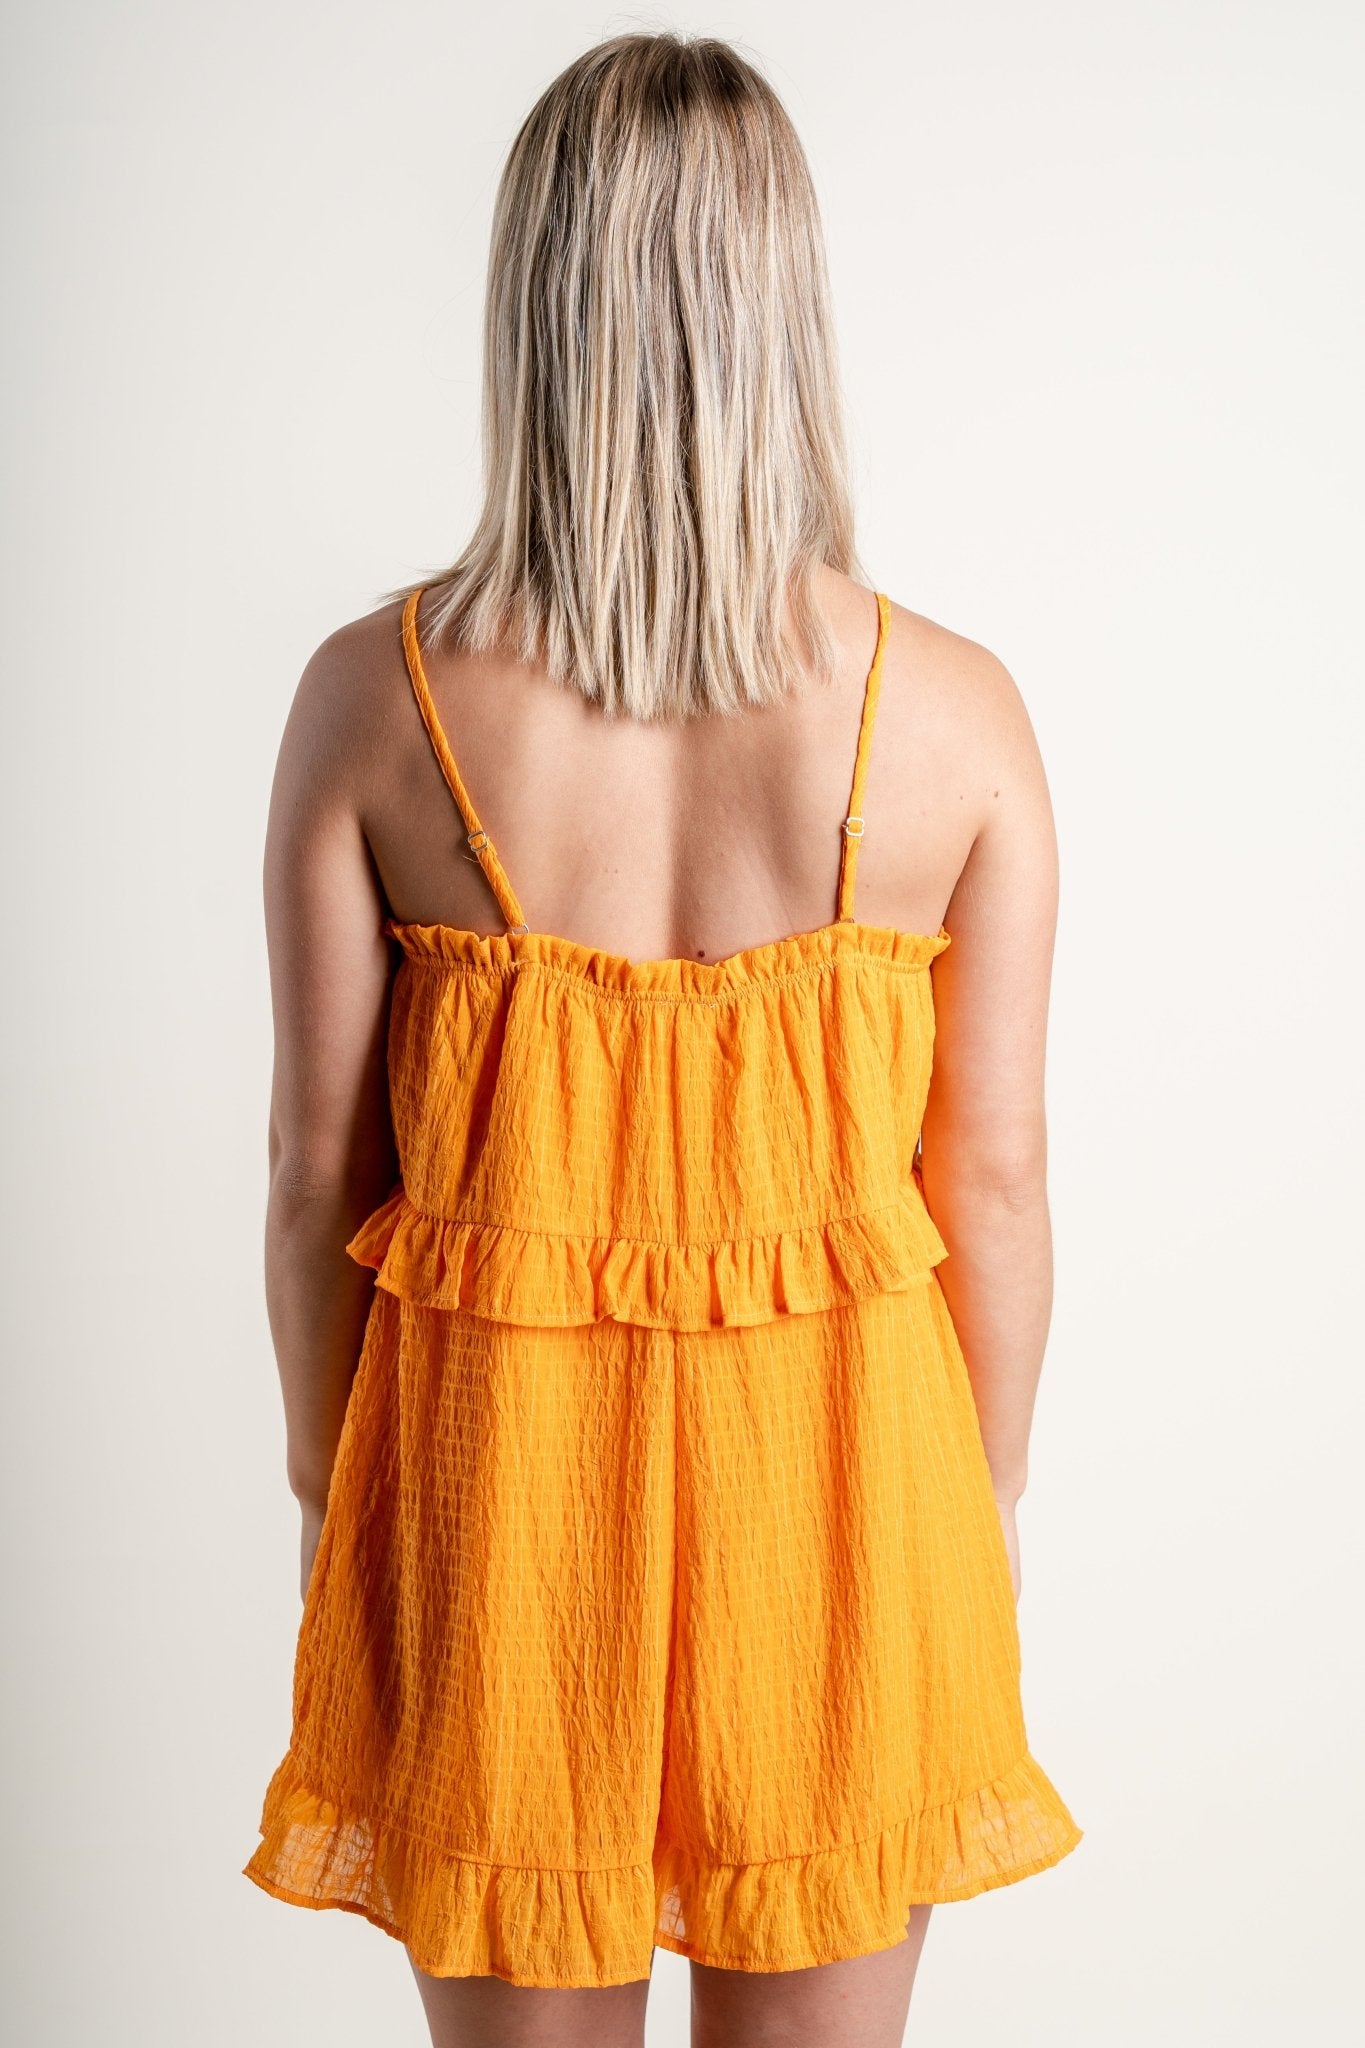 Ruffle detail romper orange - Affordable Romper - Boutique Rompers & Pantsuits at Lush Fashion Lounge Boutique in Oklahoma City